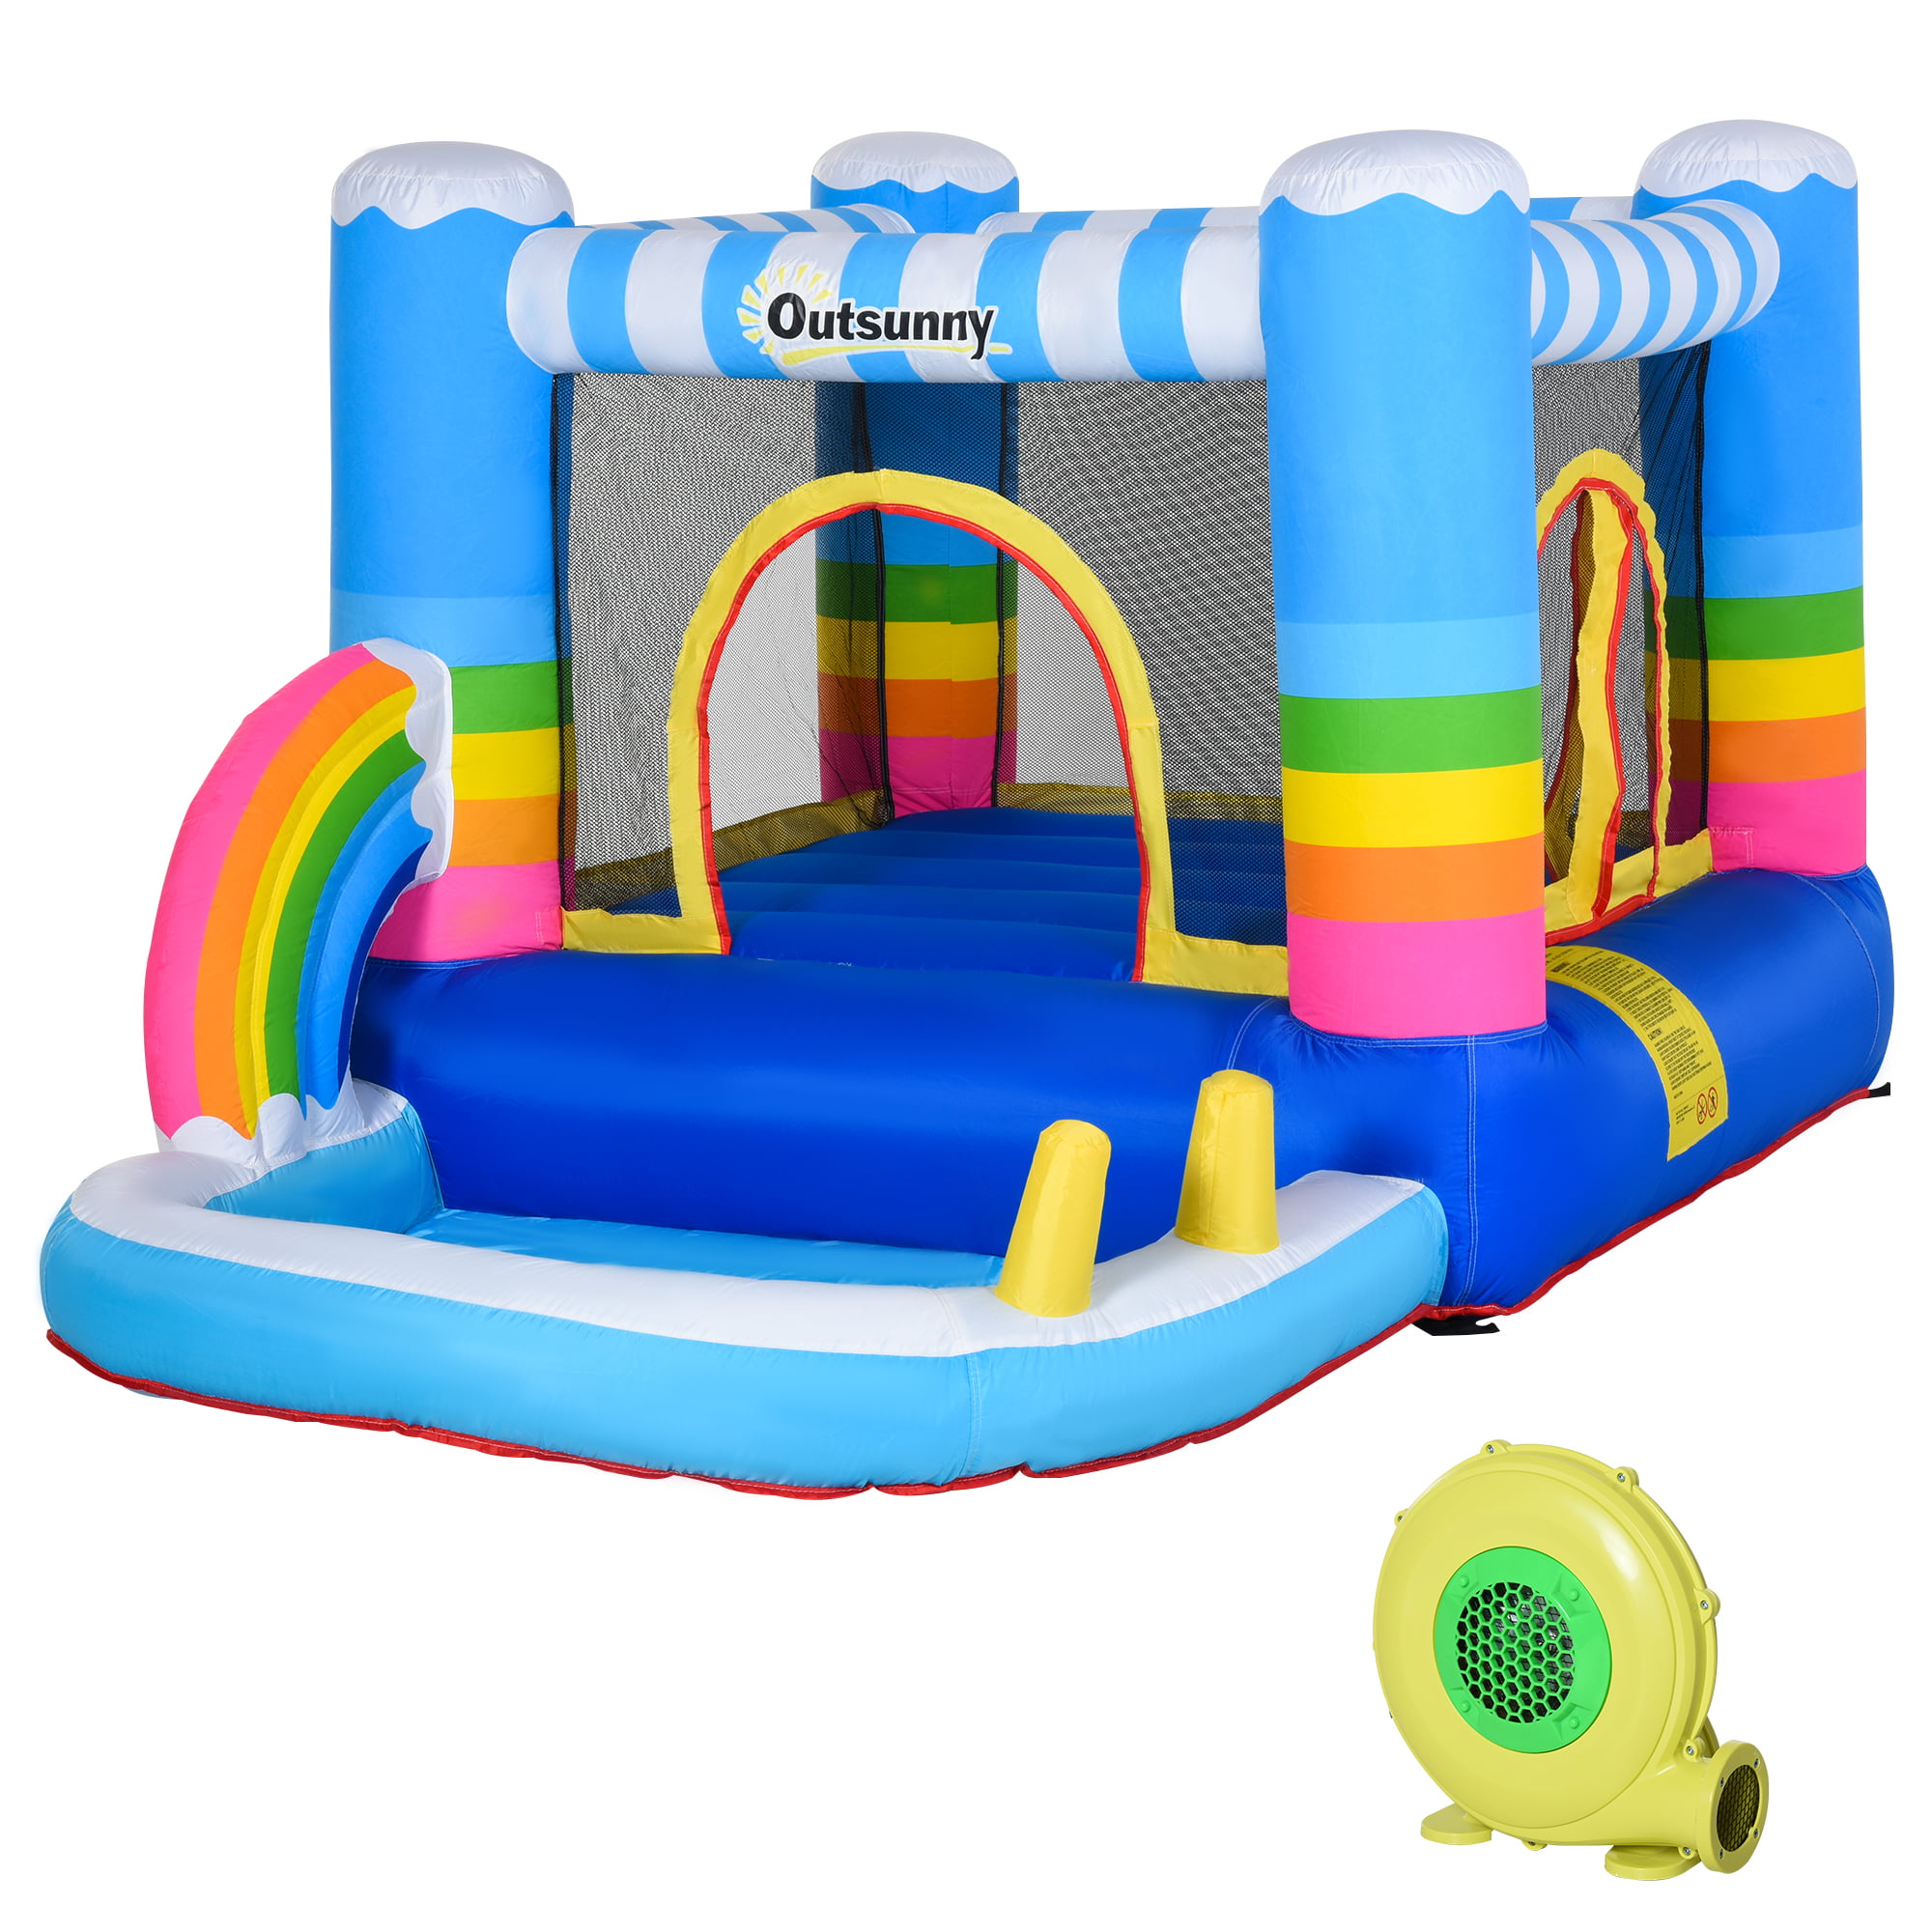 Fantasy Bounce House with Lights and Sound interaction inflatable 